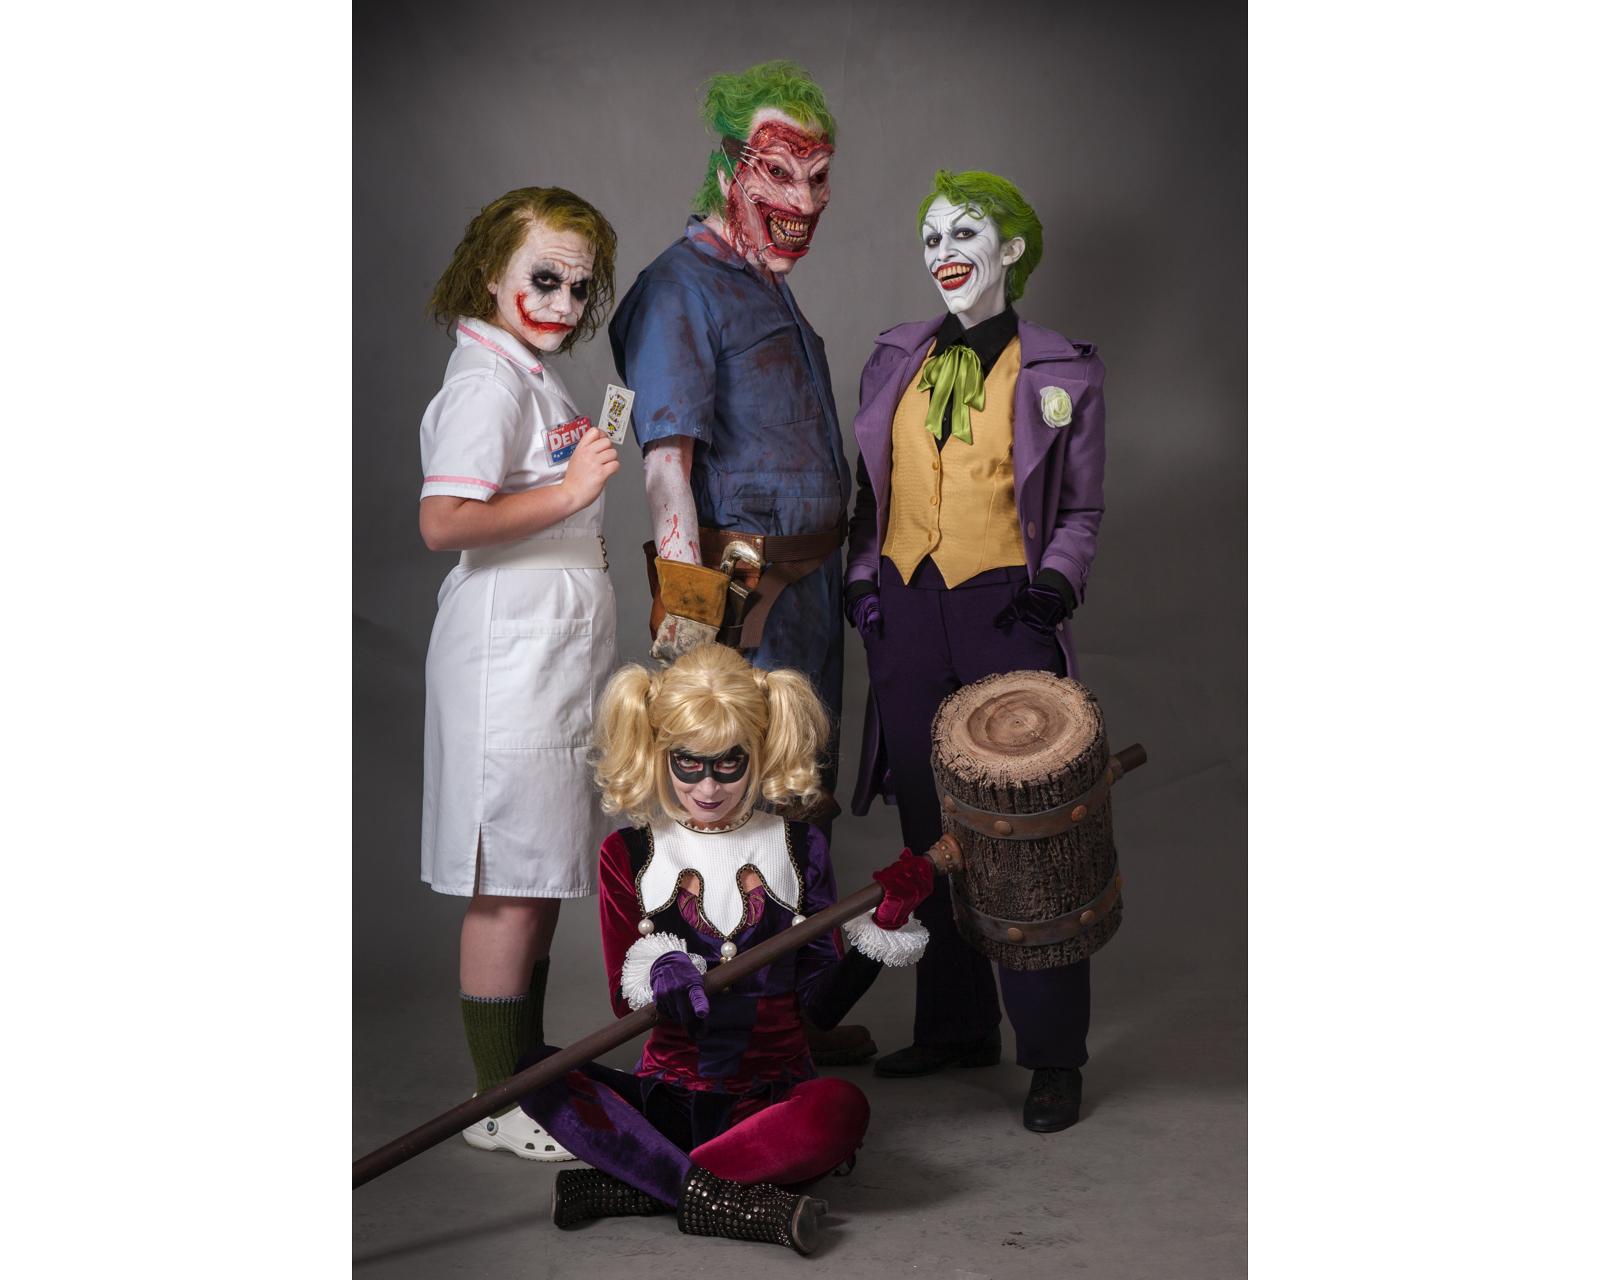 Rick Baker (center) gave his family movie-style makeup one Halloween to become different iterations of the Joker (and Harley Quinn), from screen to comic book.